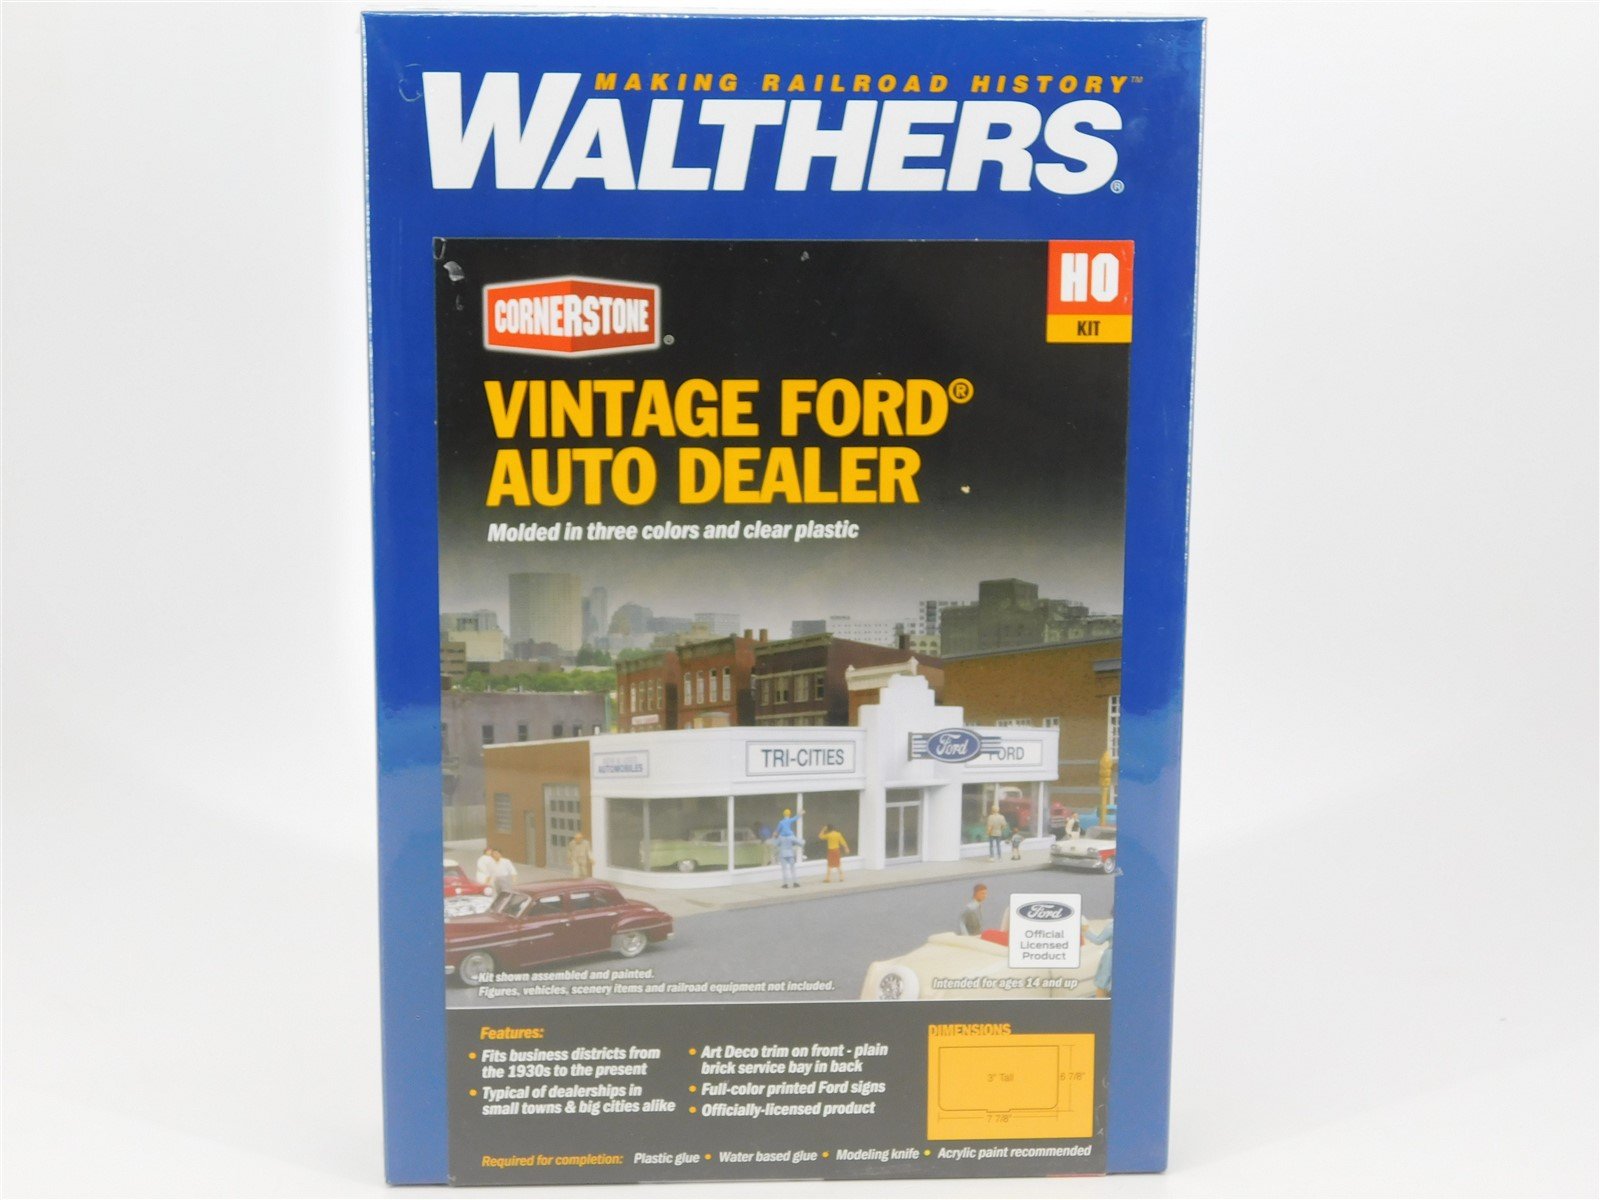 HO Scale Walthers Cornerstone Kit #933-3490 Vintage Ford Auto Dealer - SEALED